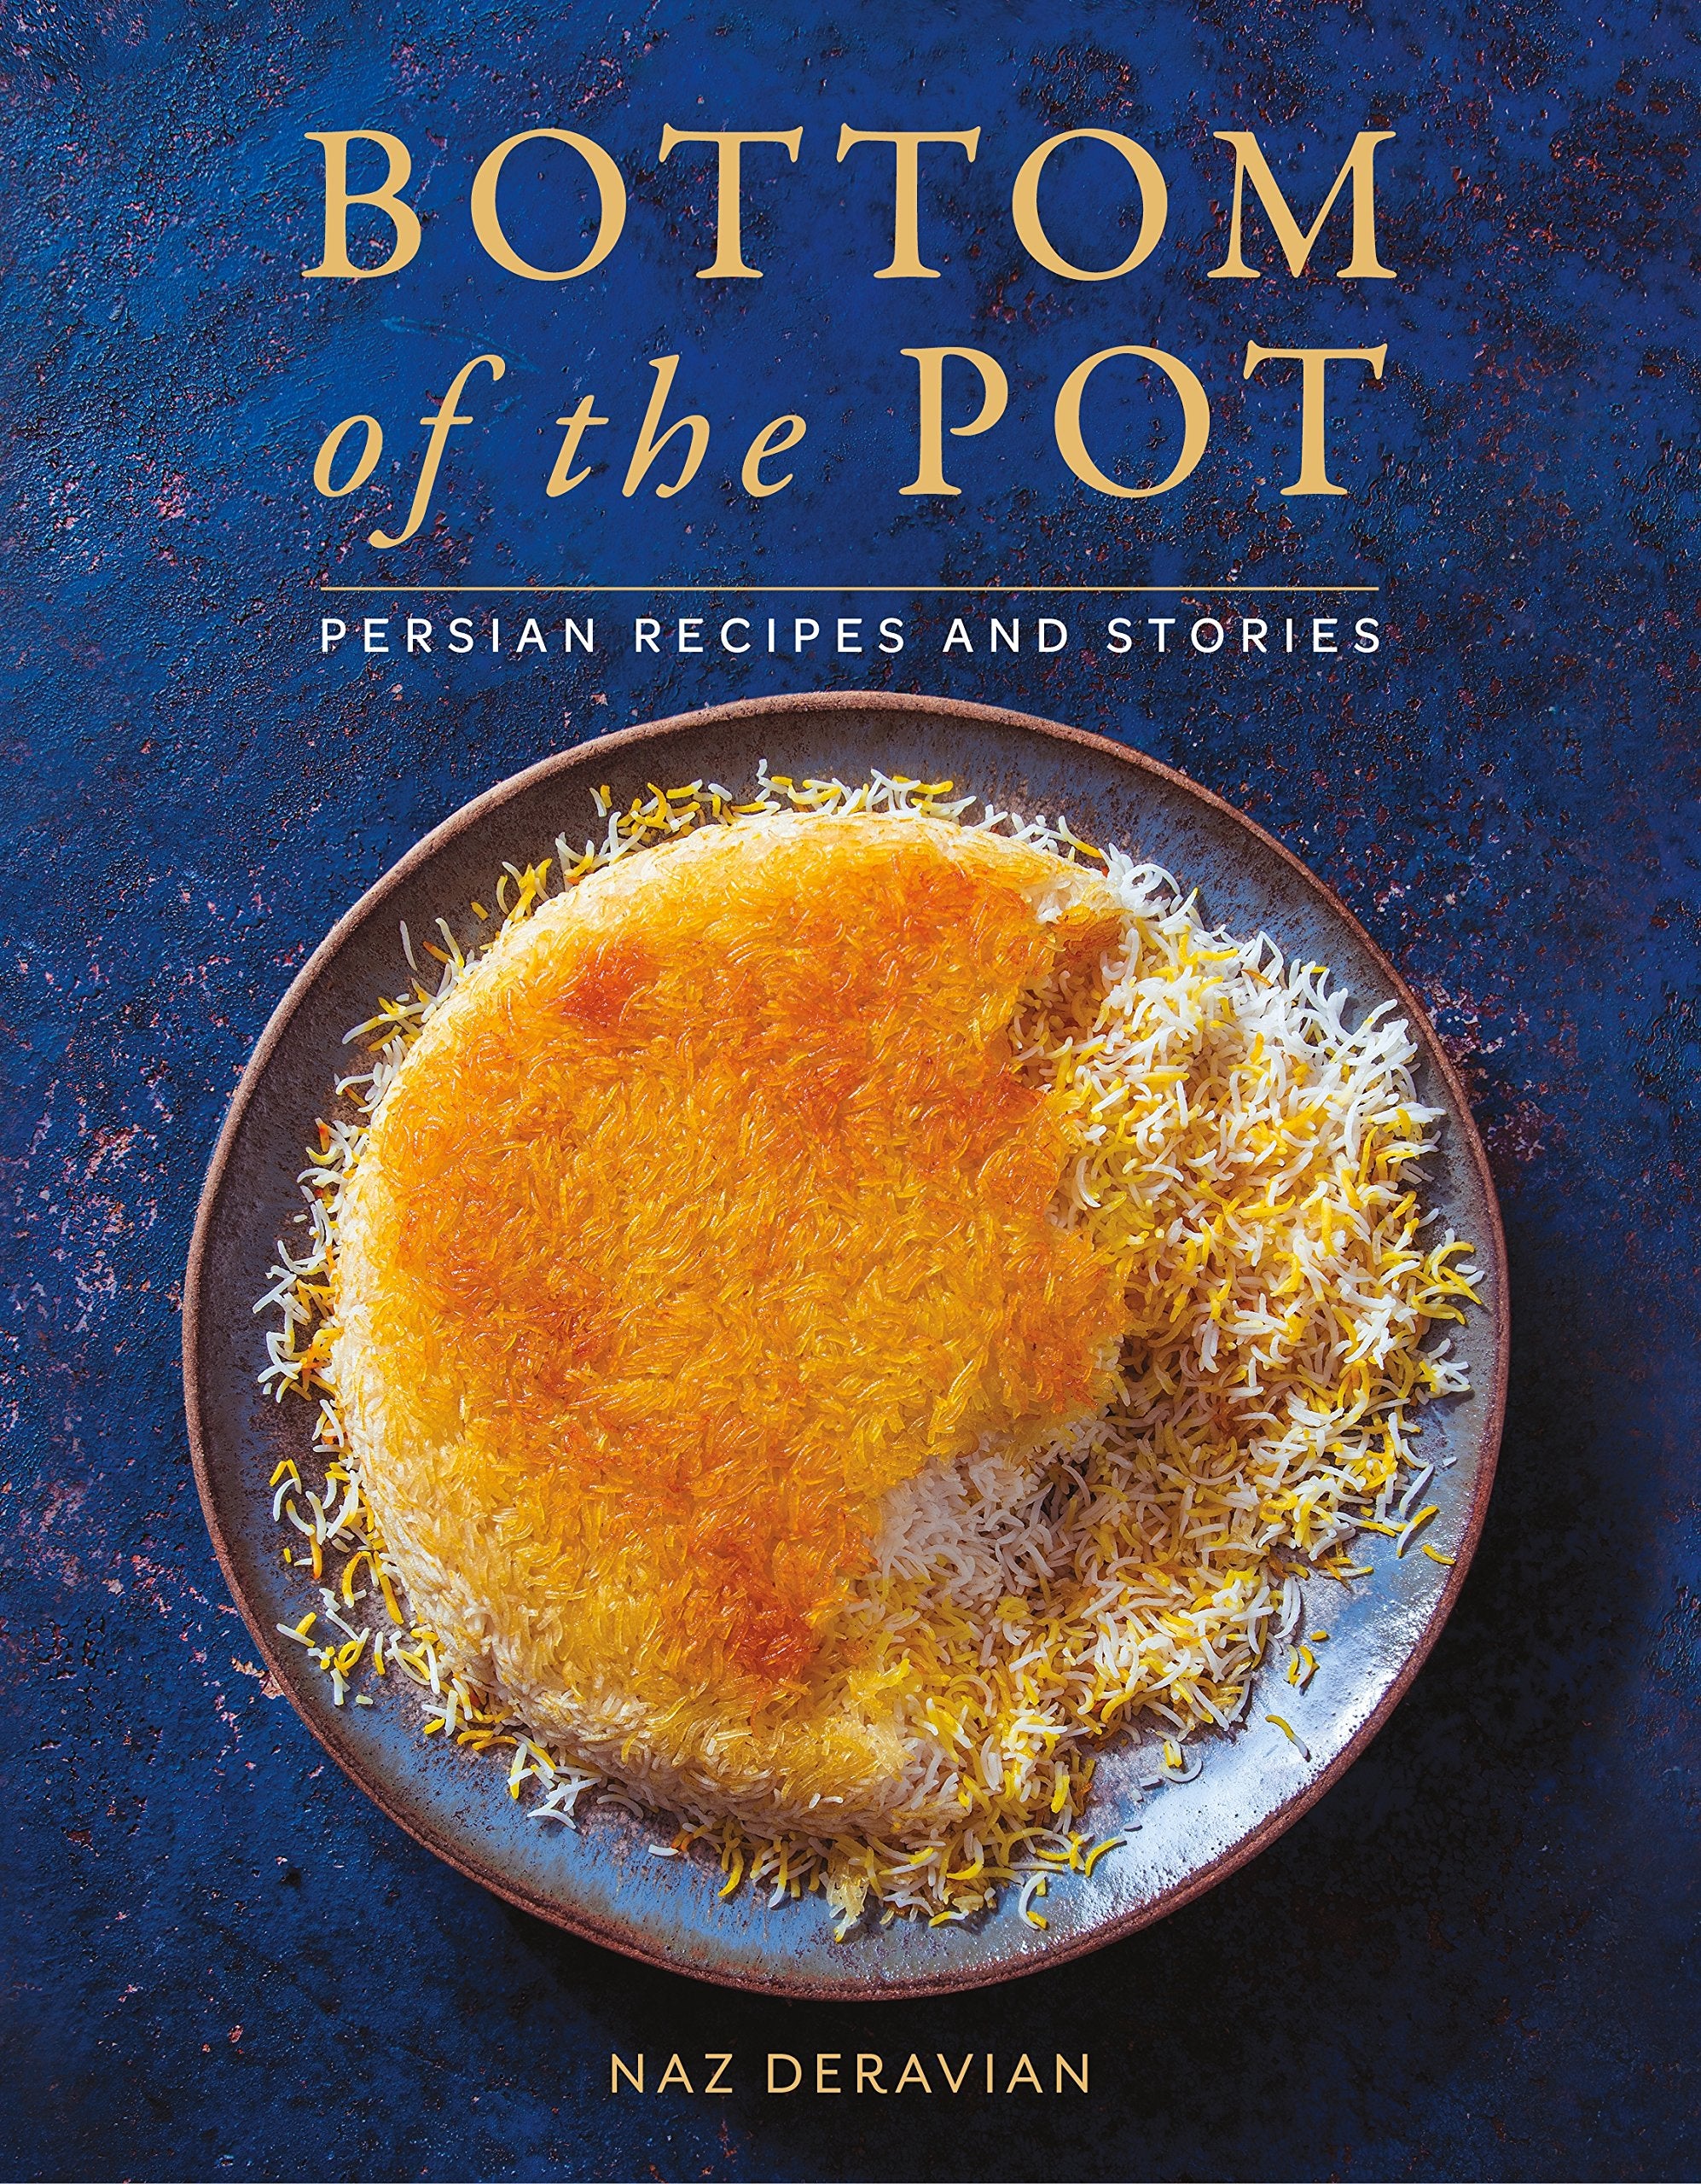 Bottom of the Pot: Persian Recipes and Stories (Naz Deravian) *Signed*